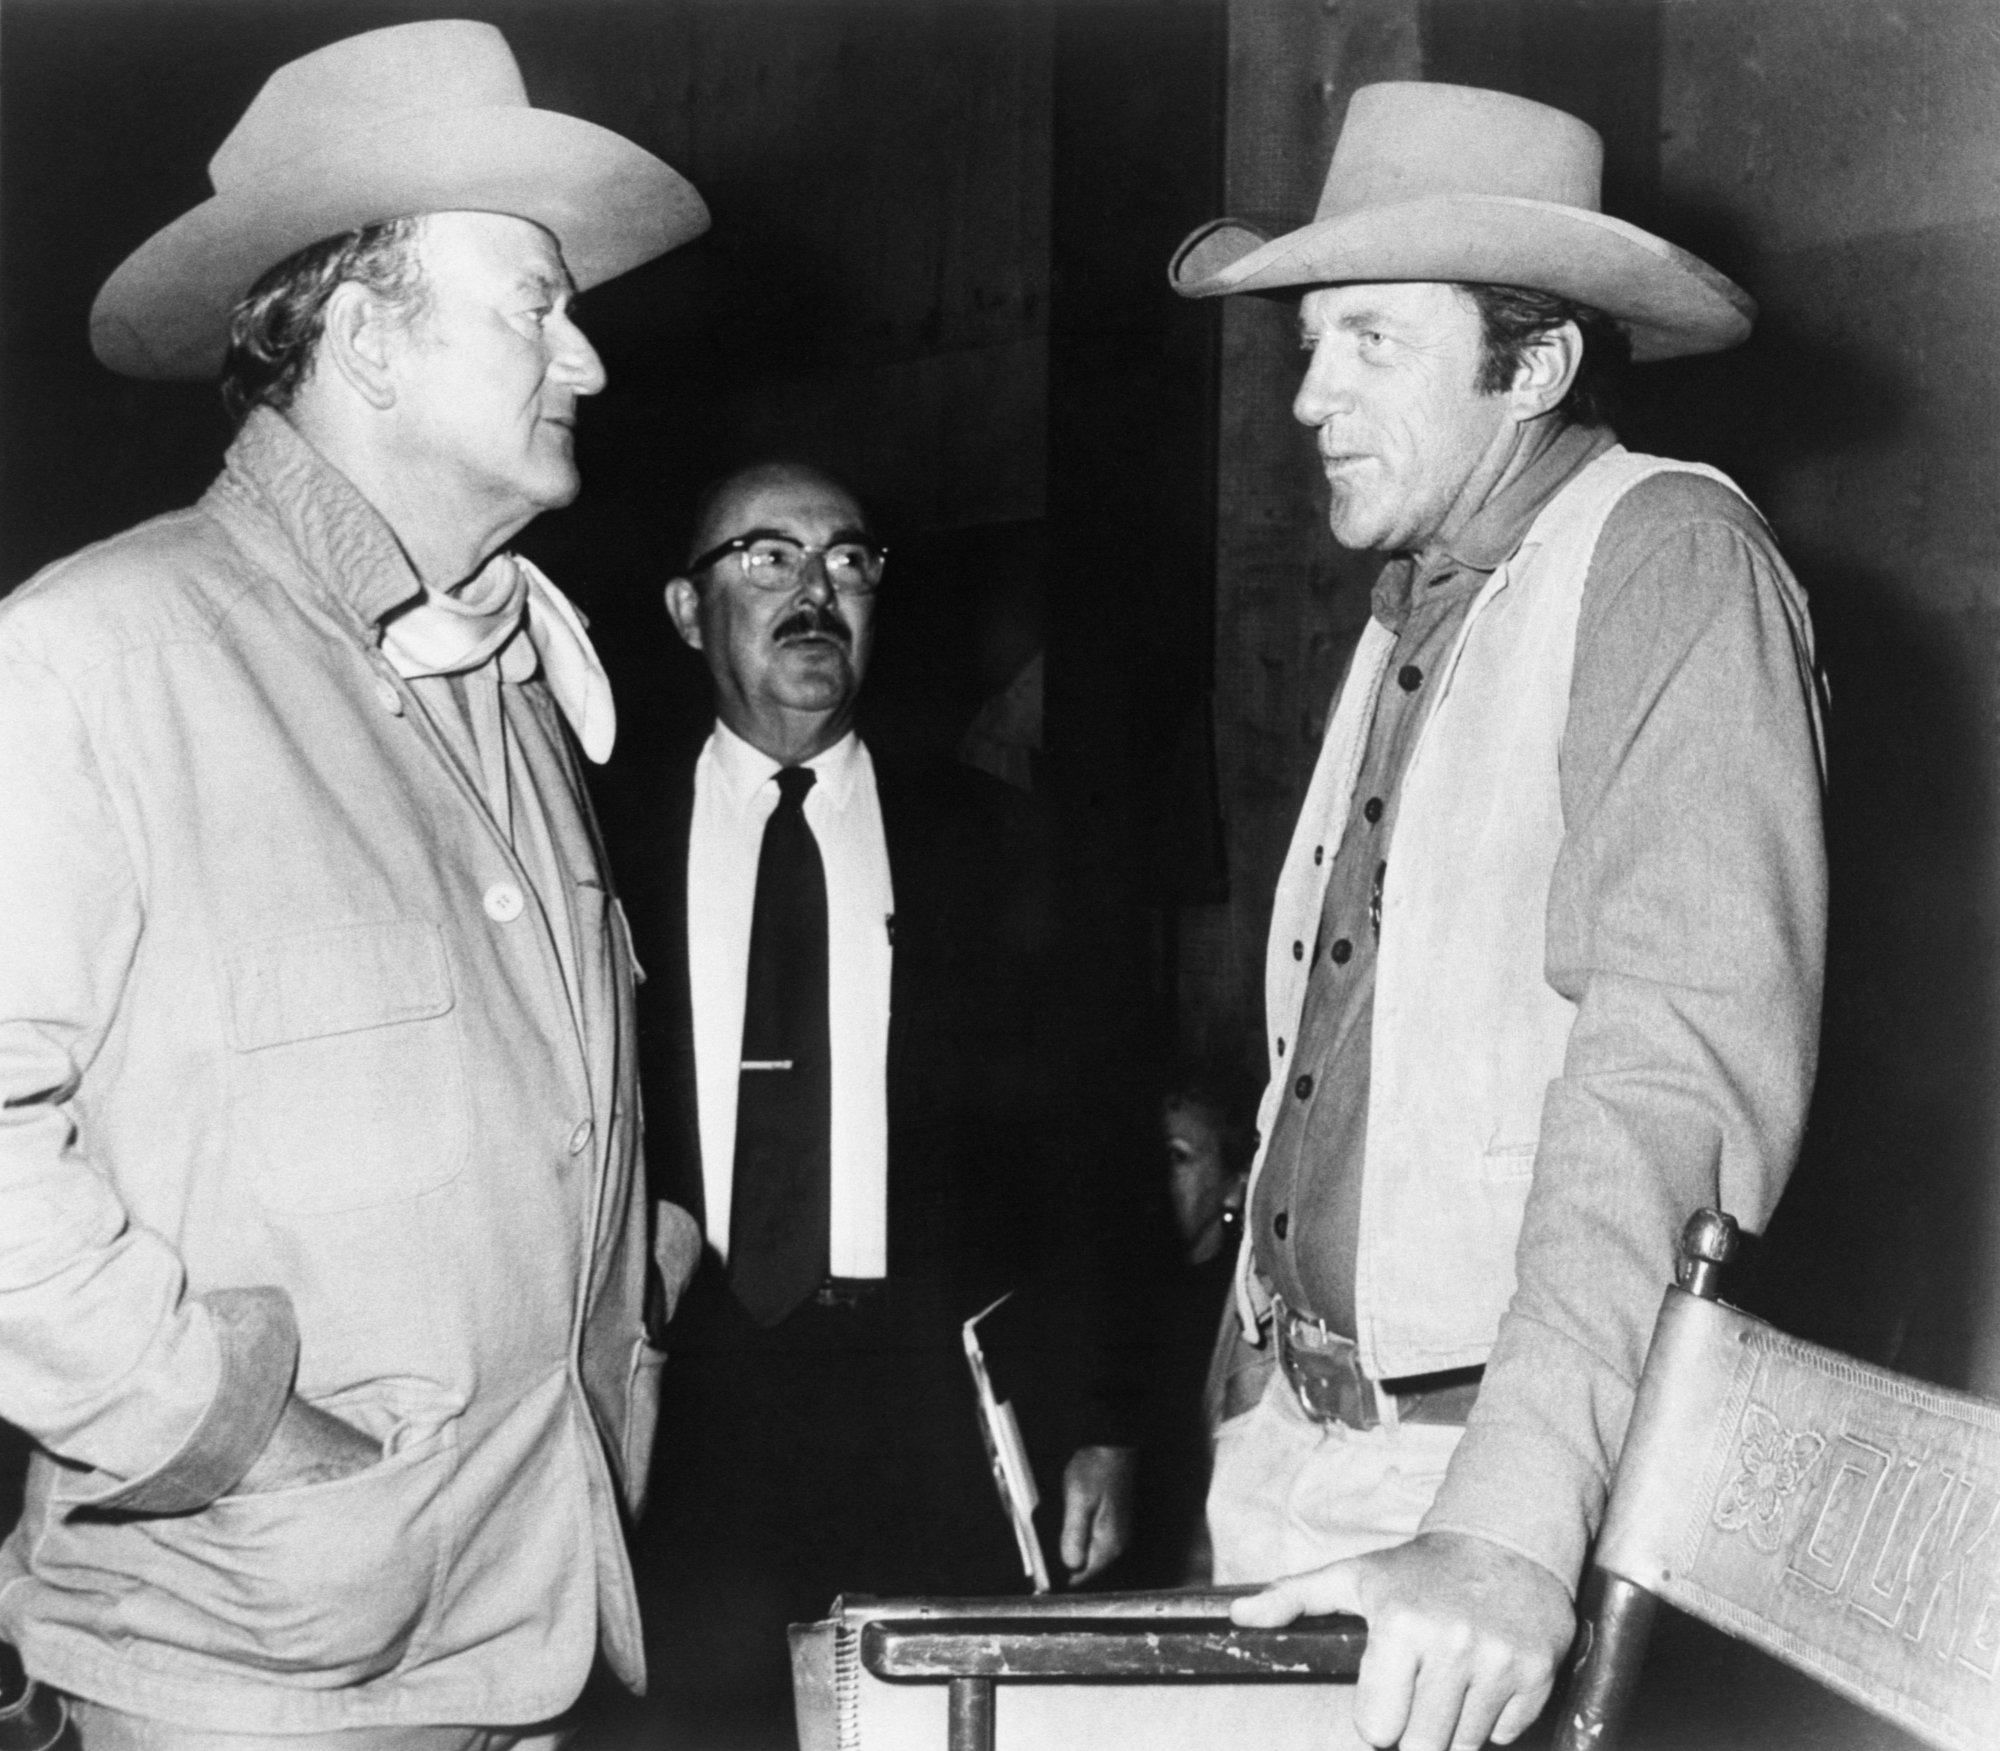 John Wayne and 'Gunsmoke' actor Jim Arness. They are facing one another wearing Western cowboy costumes. Wayne has his hands in his pockets and Arness rests his hand on a chair.